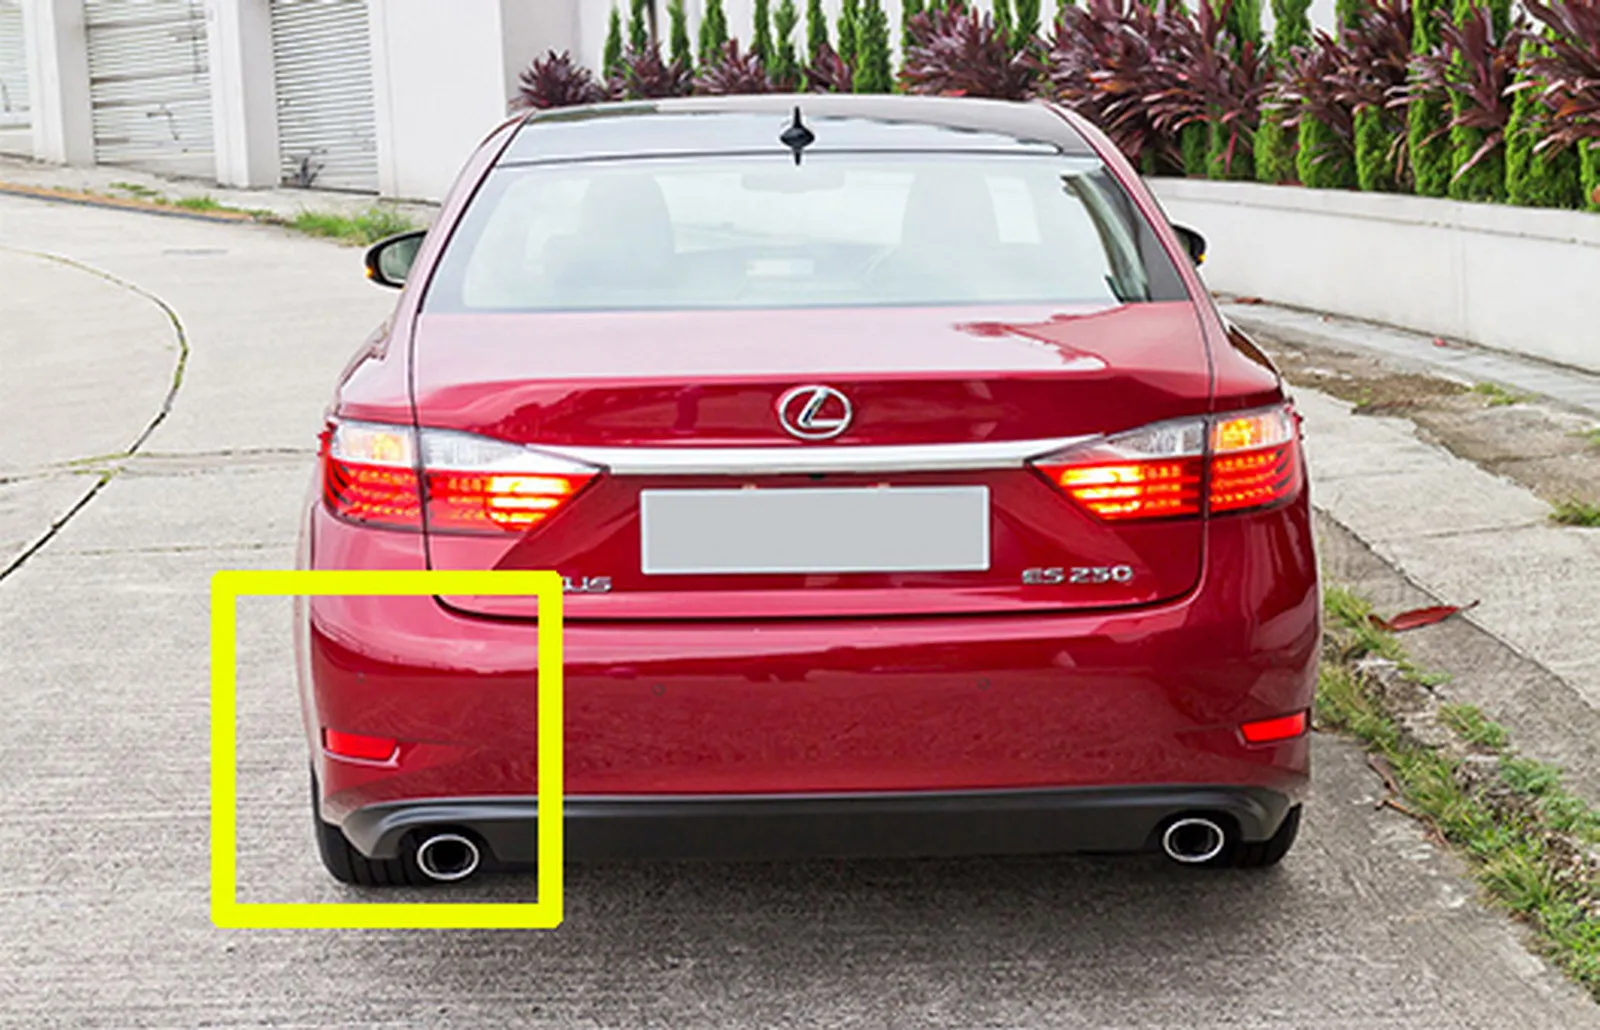 

ANGRONG 2x Red Rear Bumper Reflector LED Stop Brake Light For Lexus ES GS 250 350 300h 450h 2012+ For Toyota Corolla